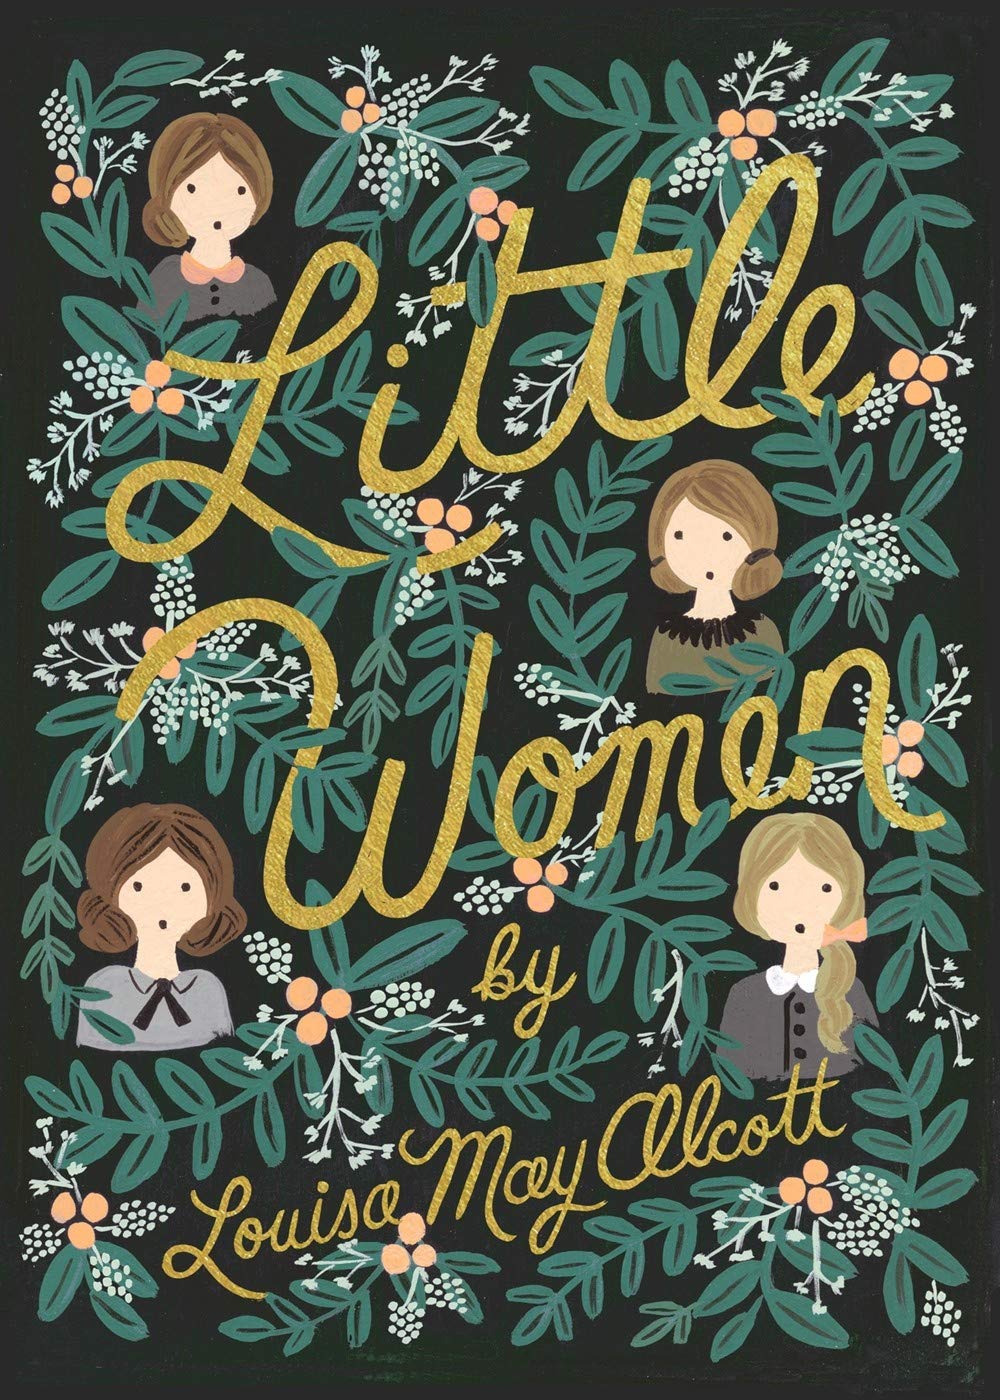 An artistic book cover illustration for "little women" by louisa may alcott, featuring stylized portraits of the four march sisters surrounded by a lush floral arrangement with the title in decorative lettering.